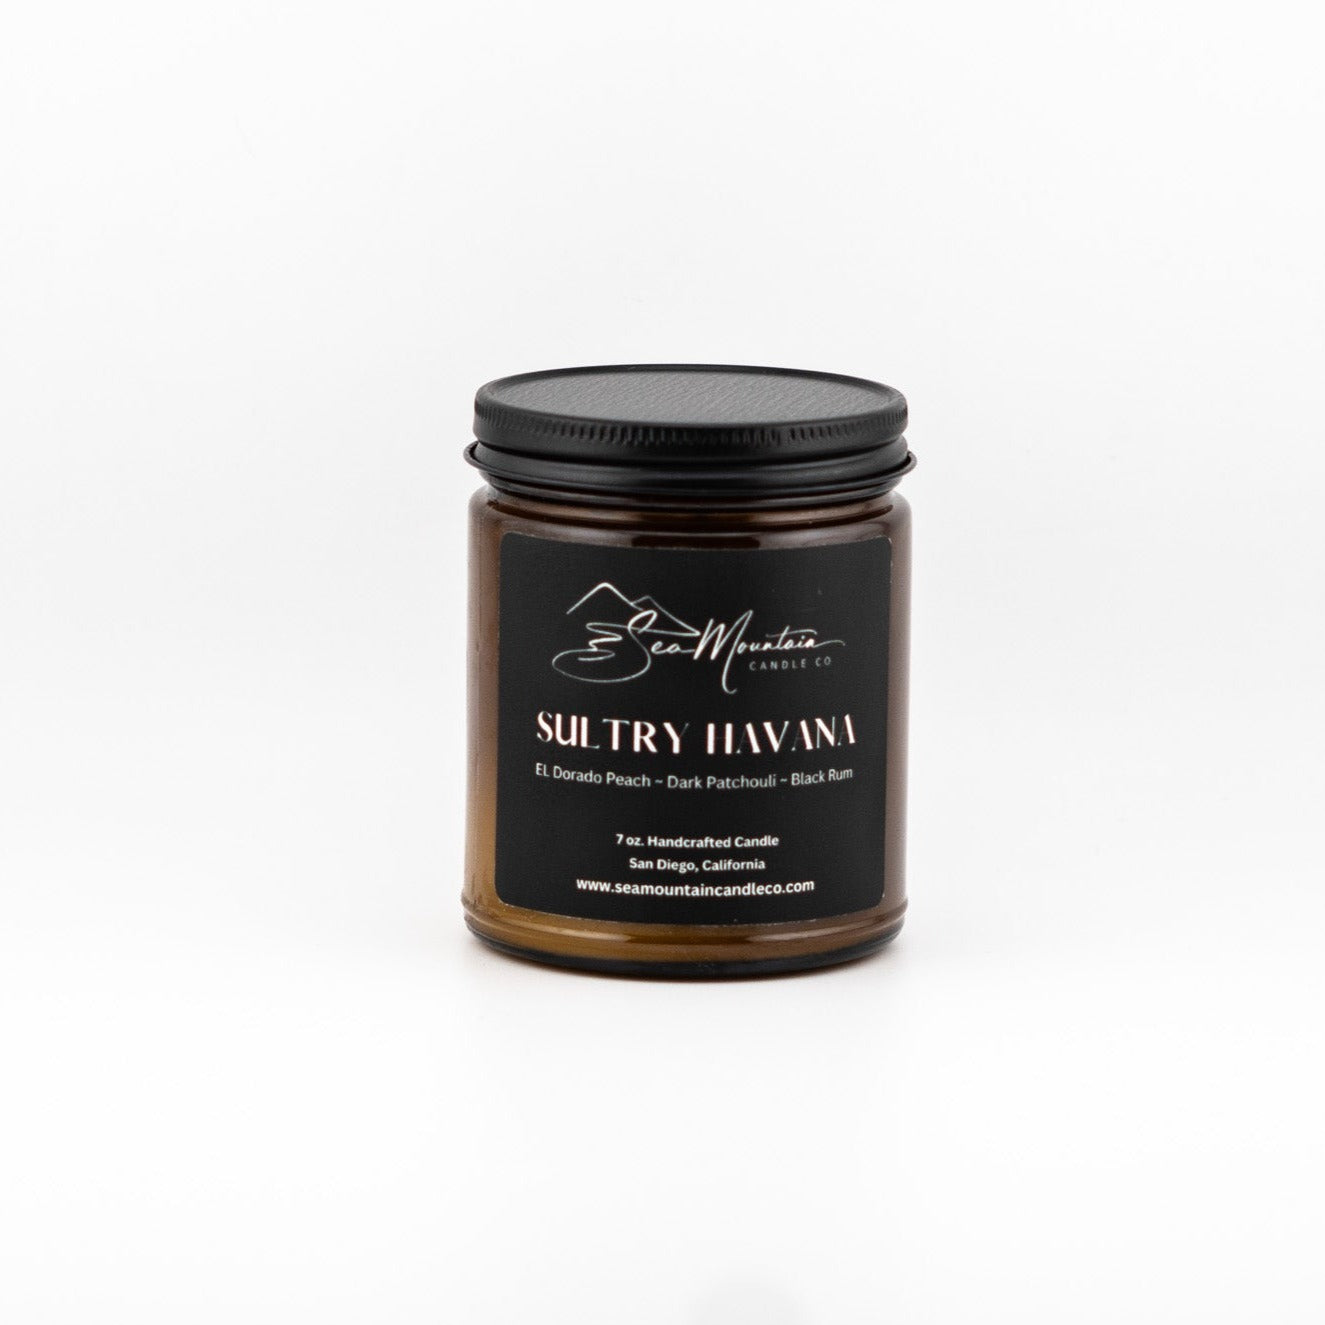 Sultry Havana 7oz. Candle